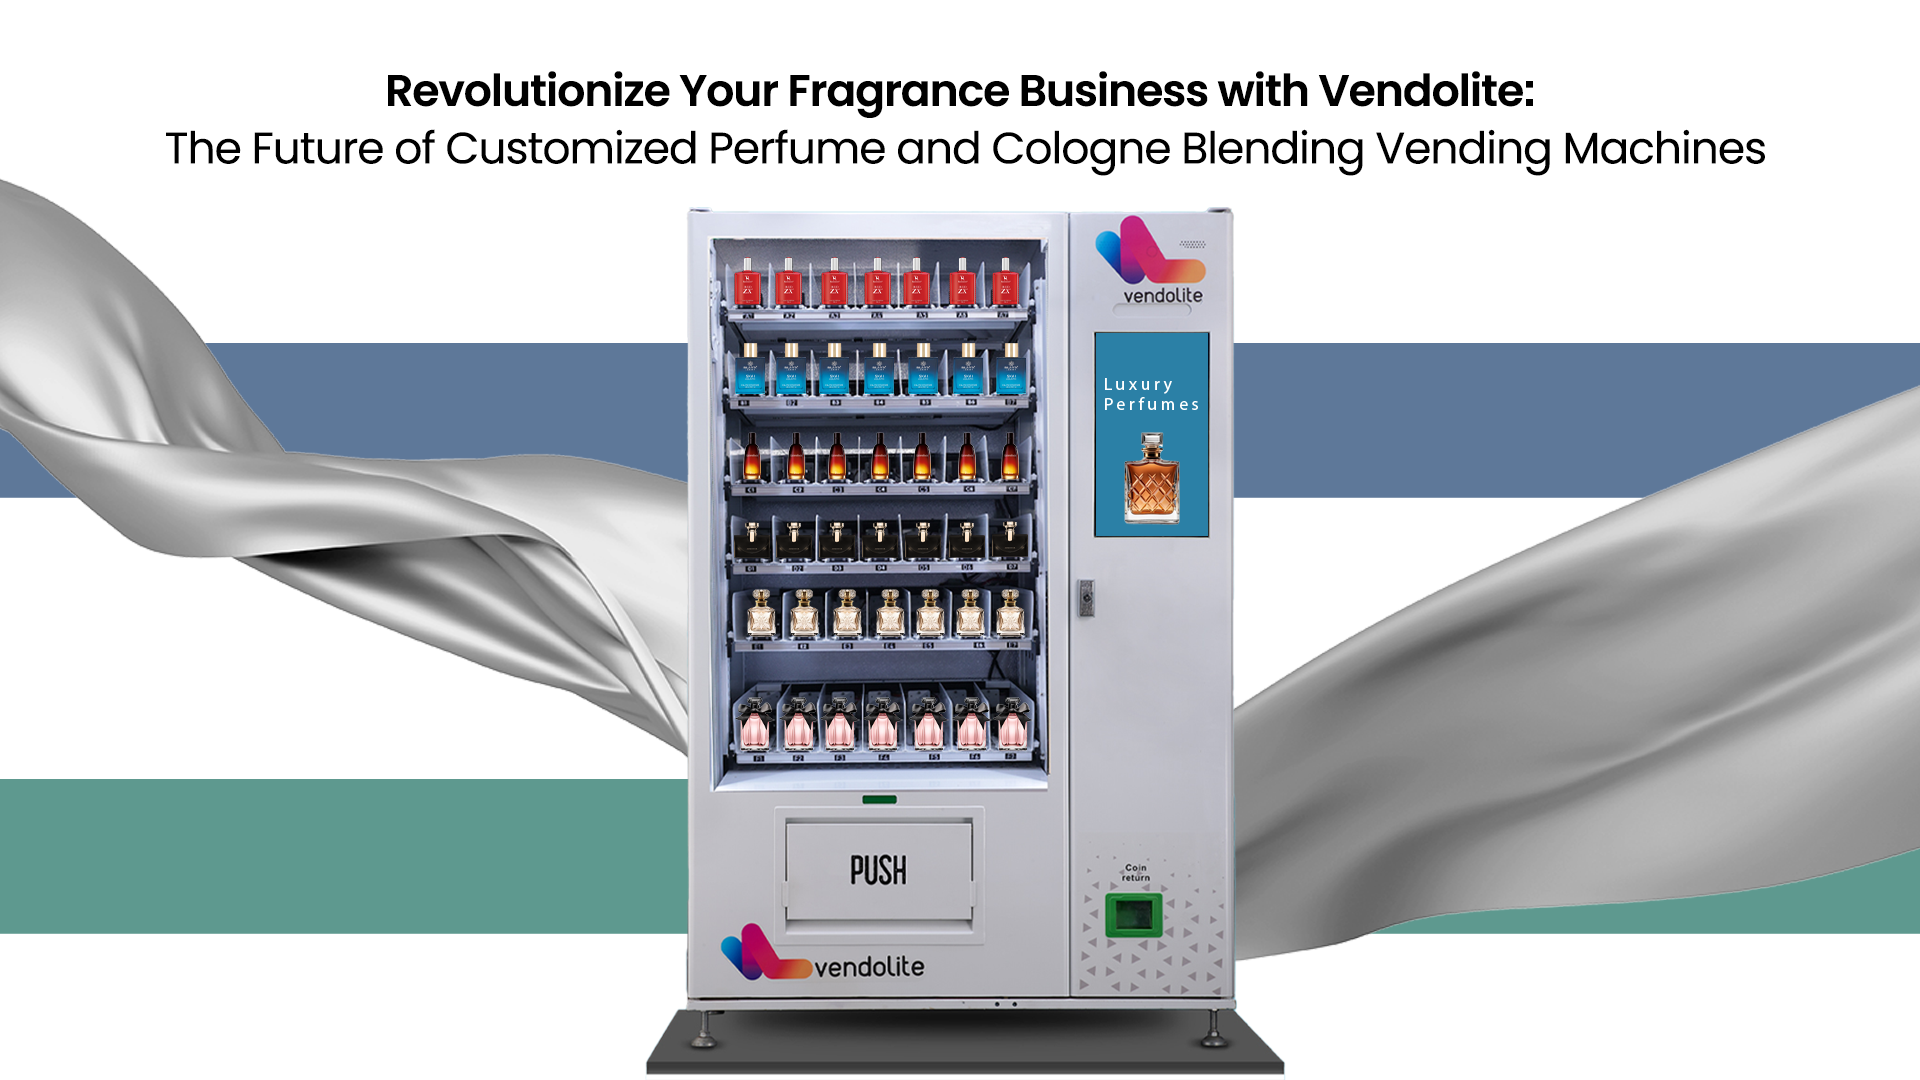 Revolutionize Your Fragrance Business with Vendolite: The Future of Customized Perfume and Cologne Blending Vending Machines